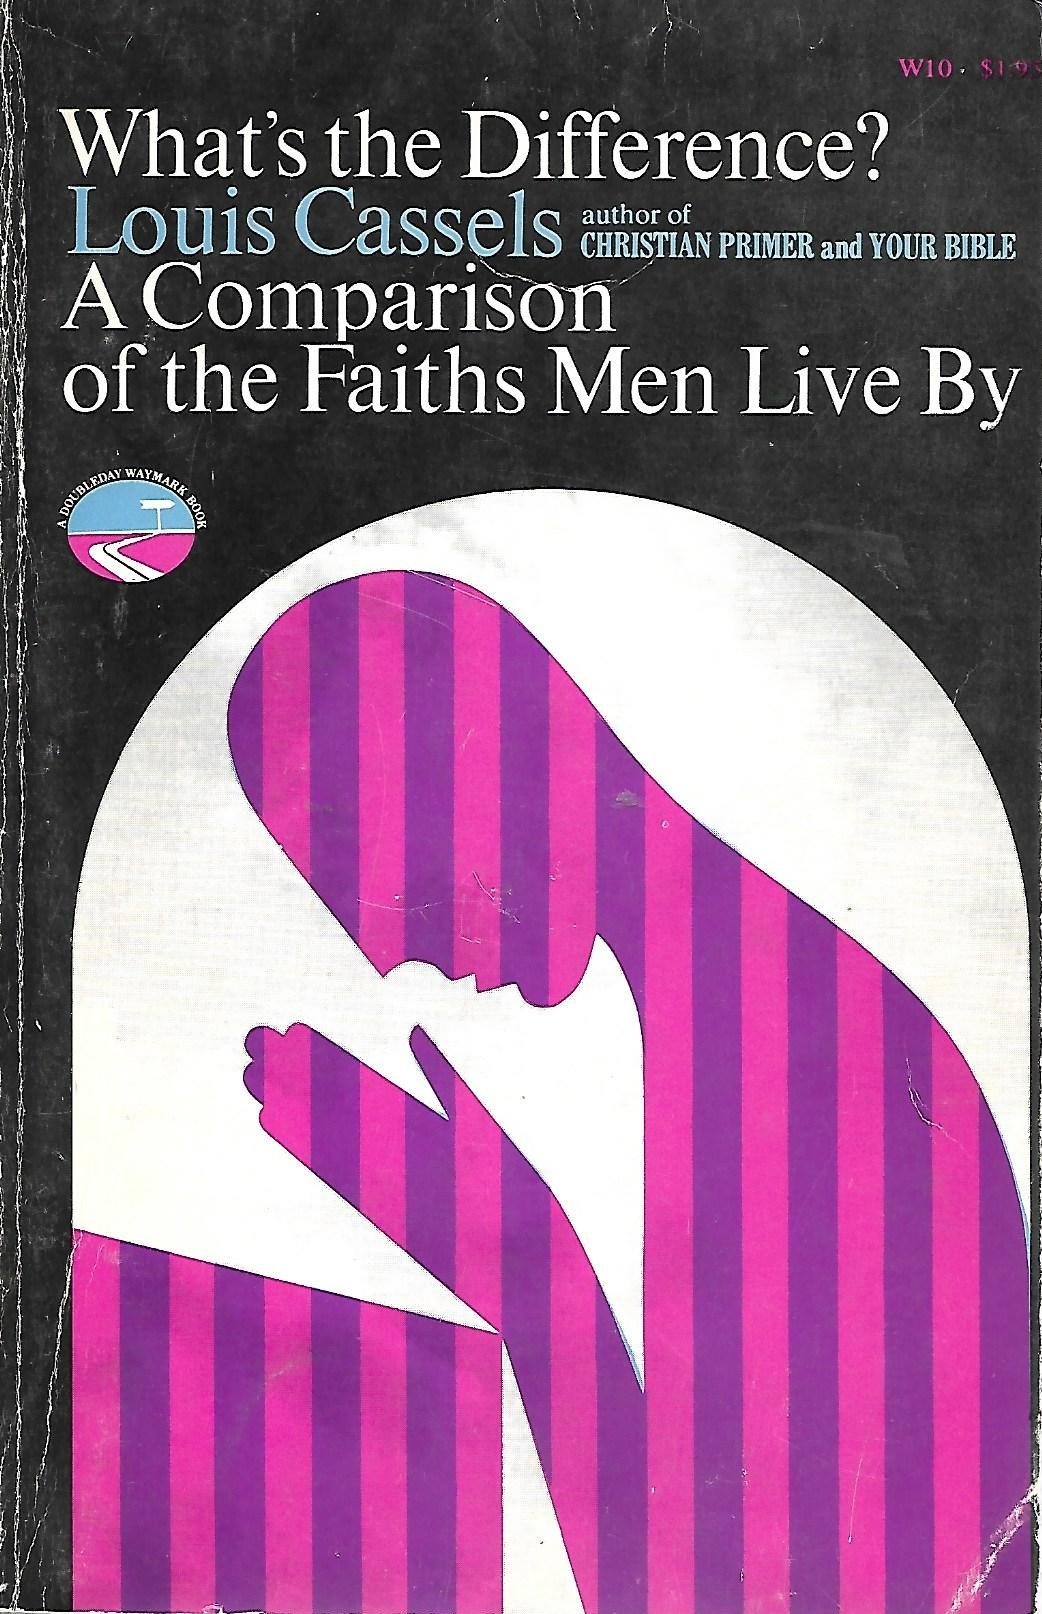 what's the difference? a comparison of the faiths men live by